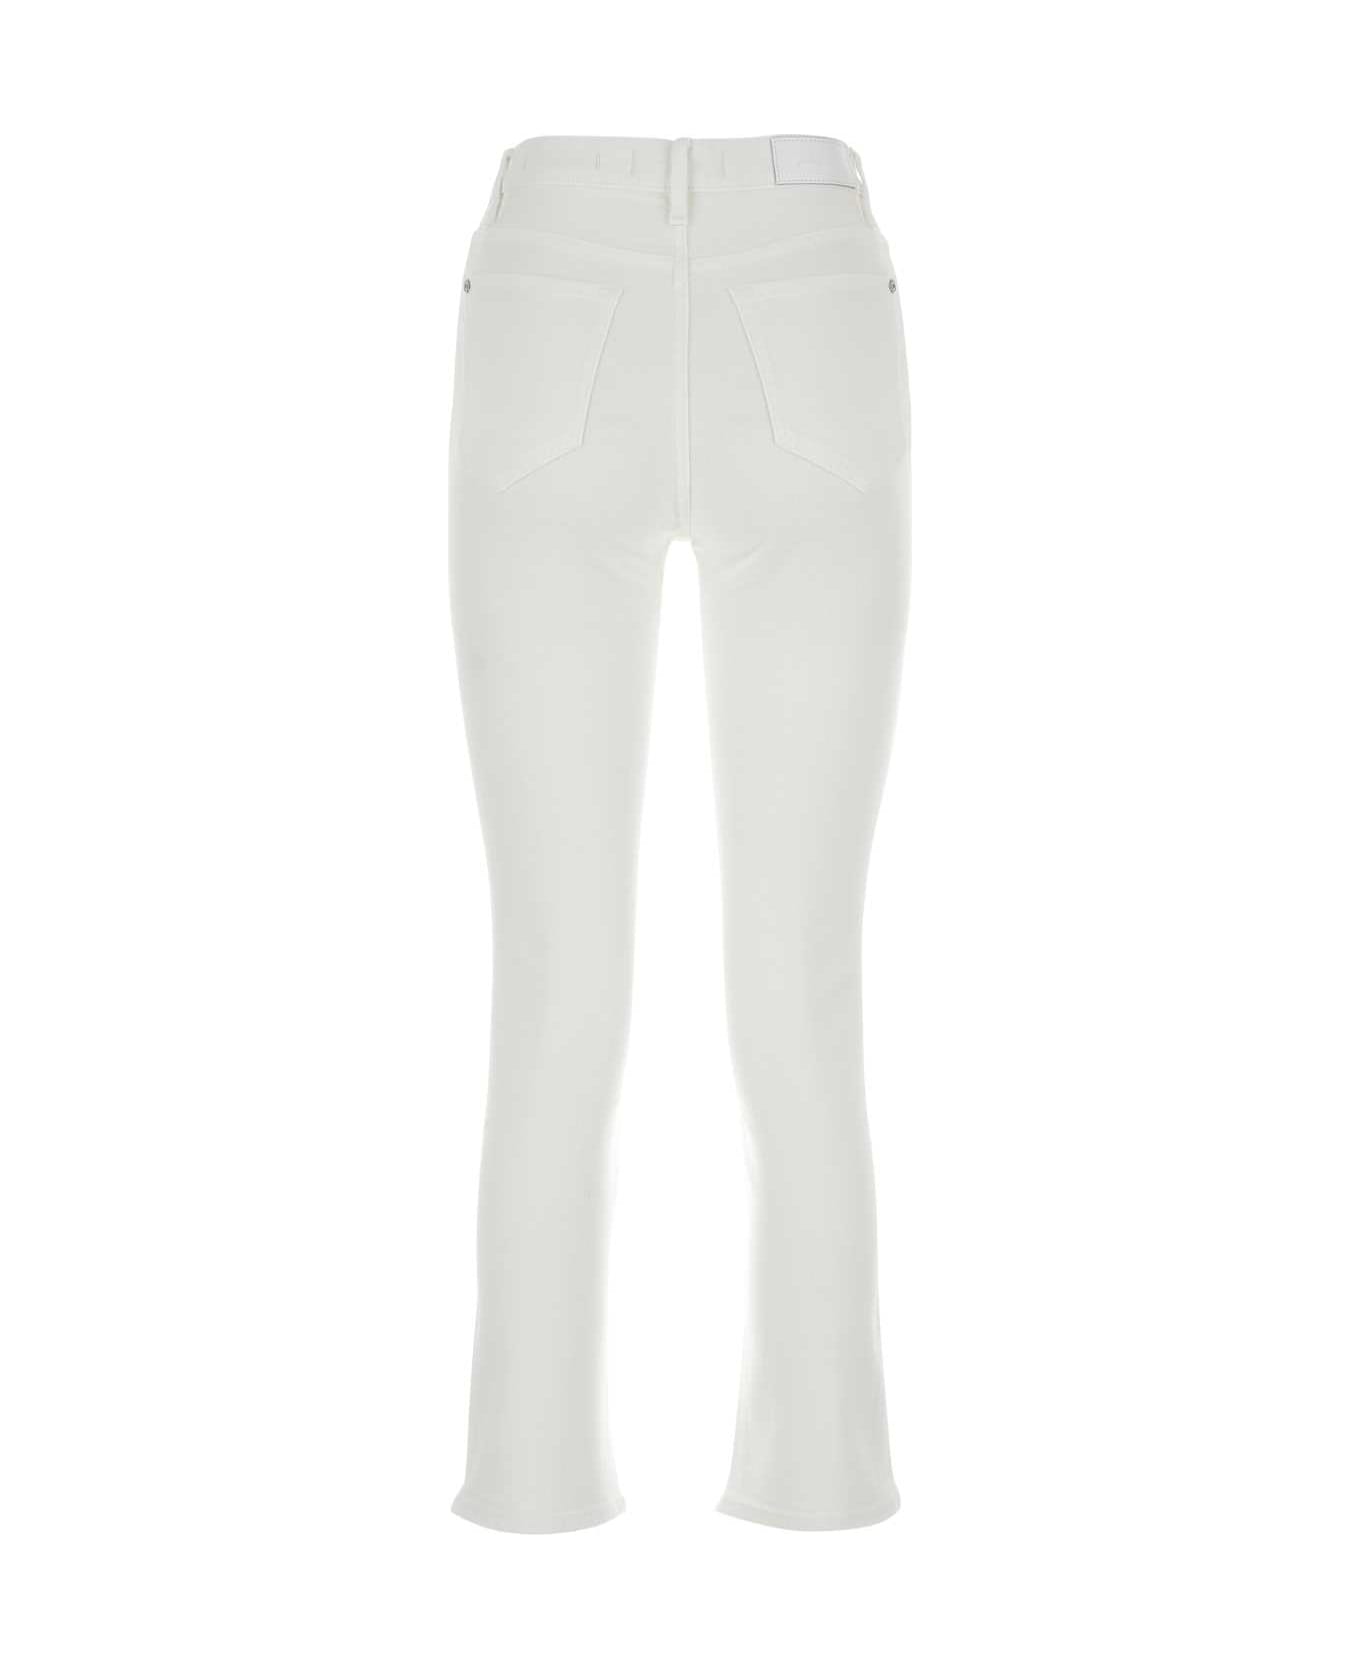 7 For All Mankind White Stretch Cotton Blend Luxe Vintage Jeans - BIANCO ボトムス